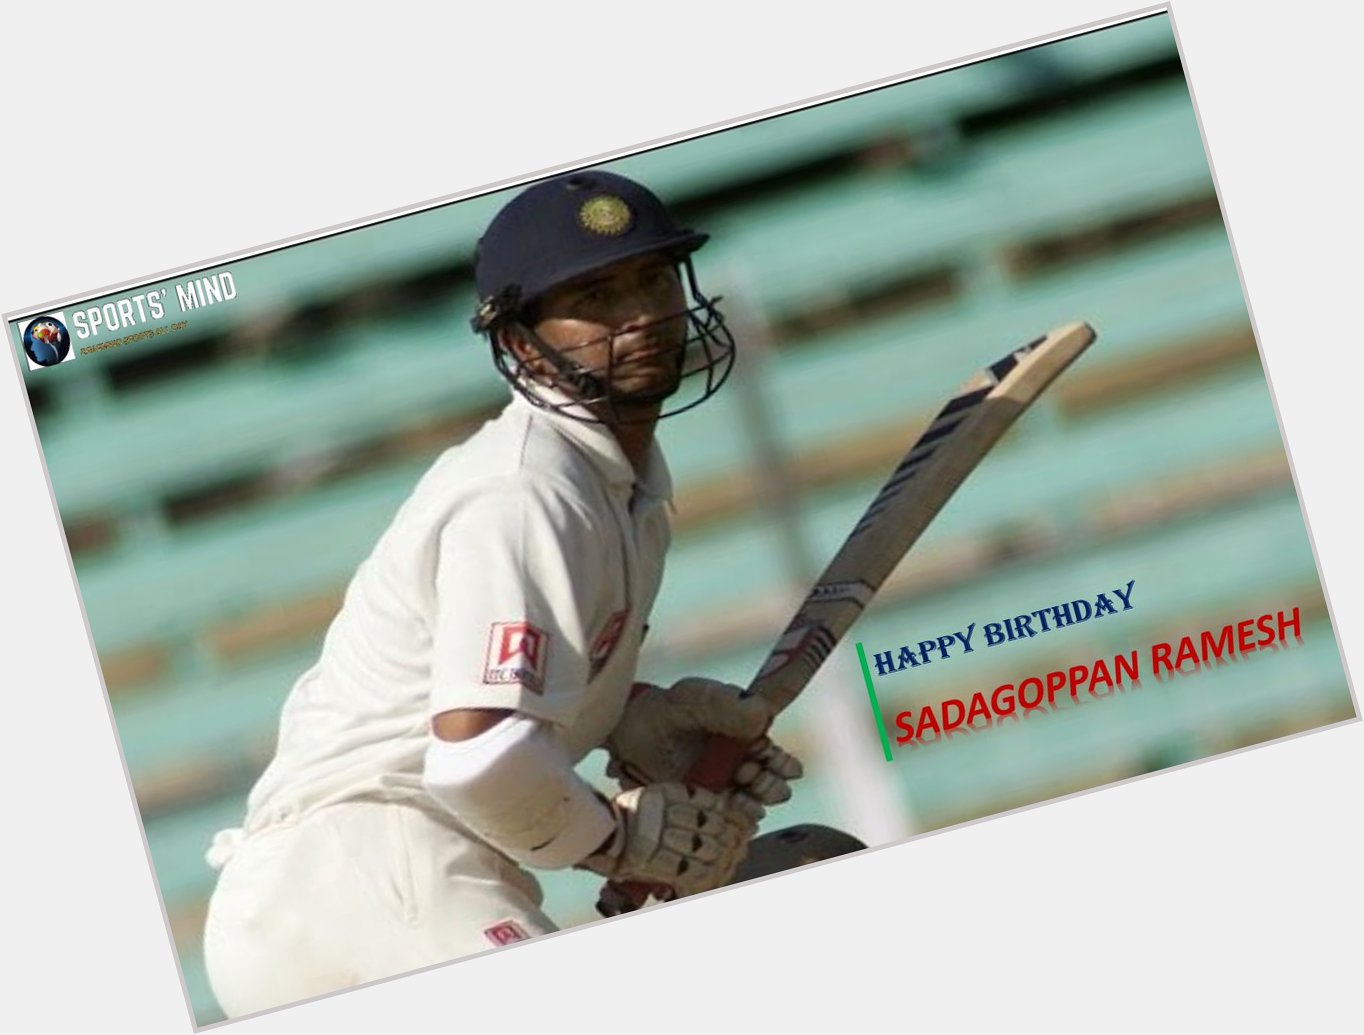 One of the most stylish batsmen but could not do justice to his potential.

Happy Birthday Sadagoppan Ramesh 